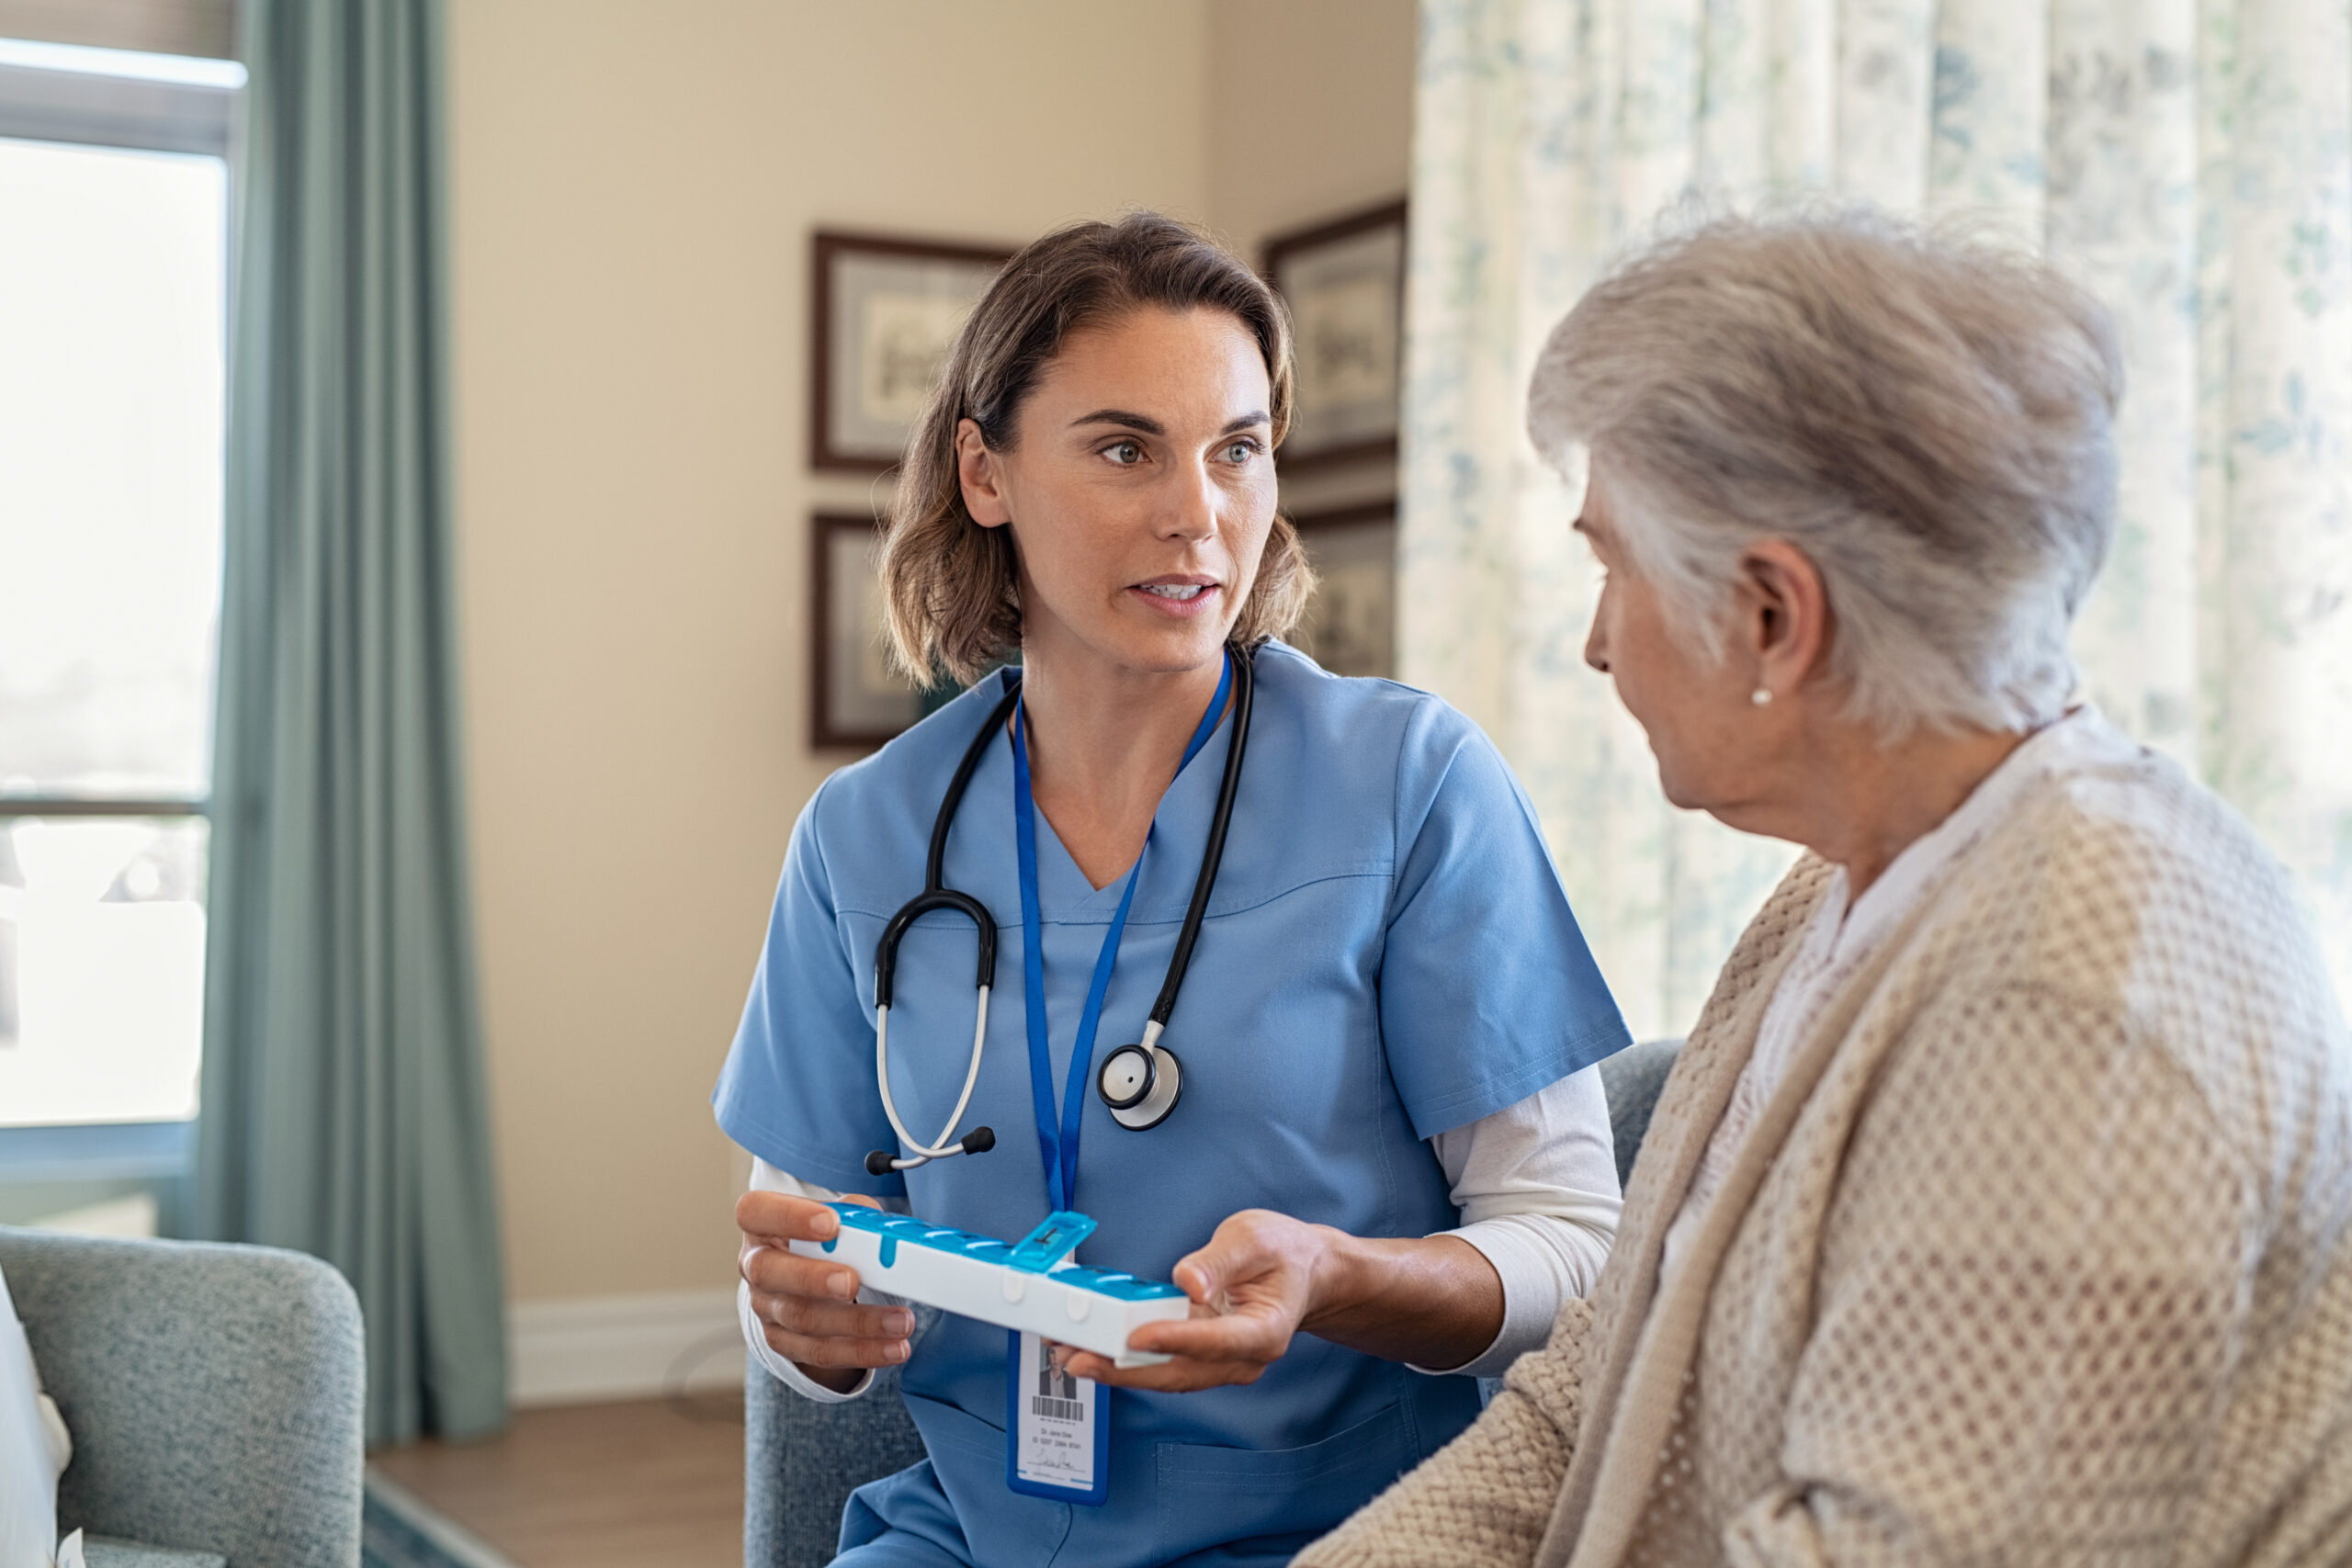 A Day in the Life of a Home Health Care Nurse